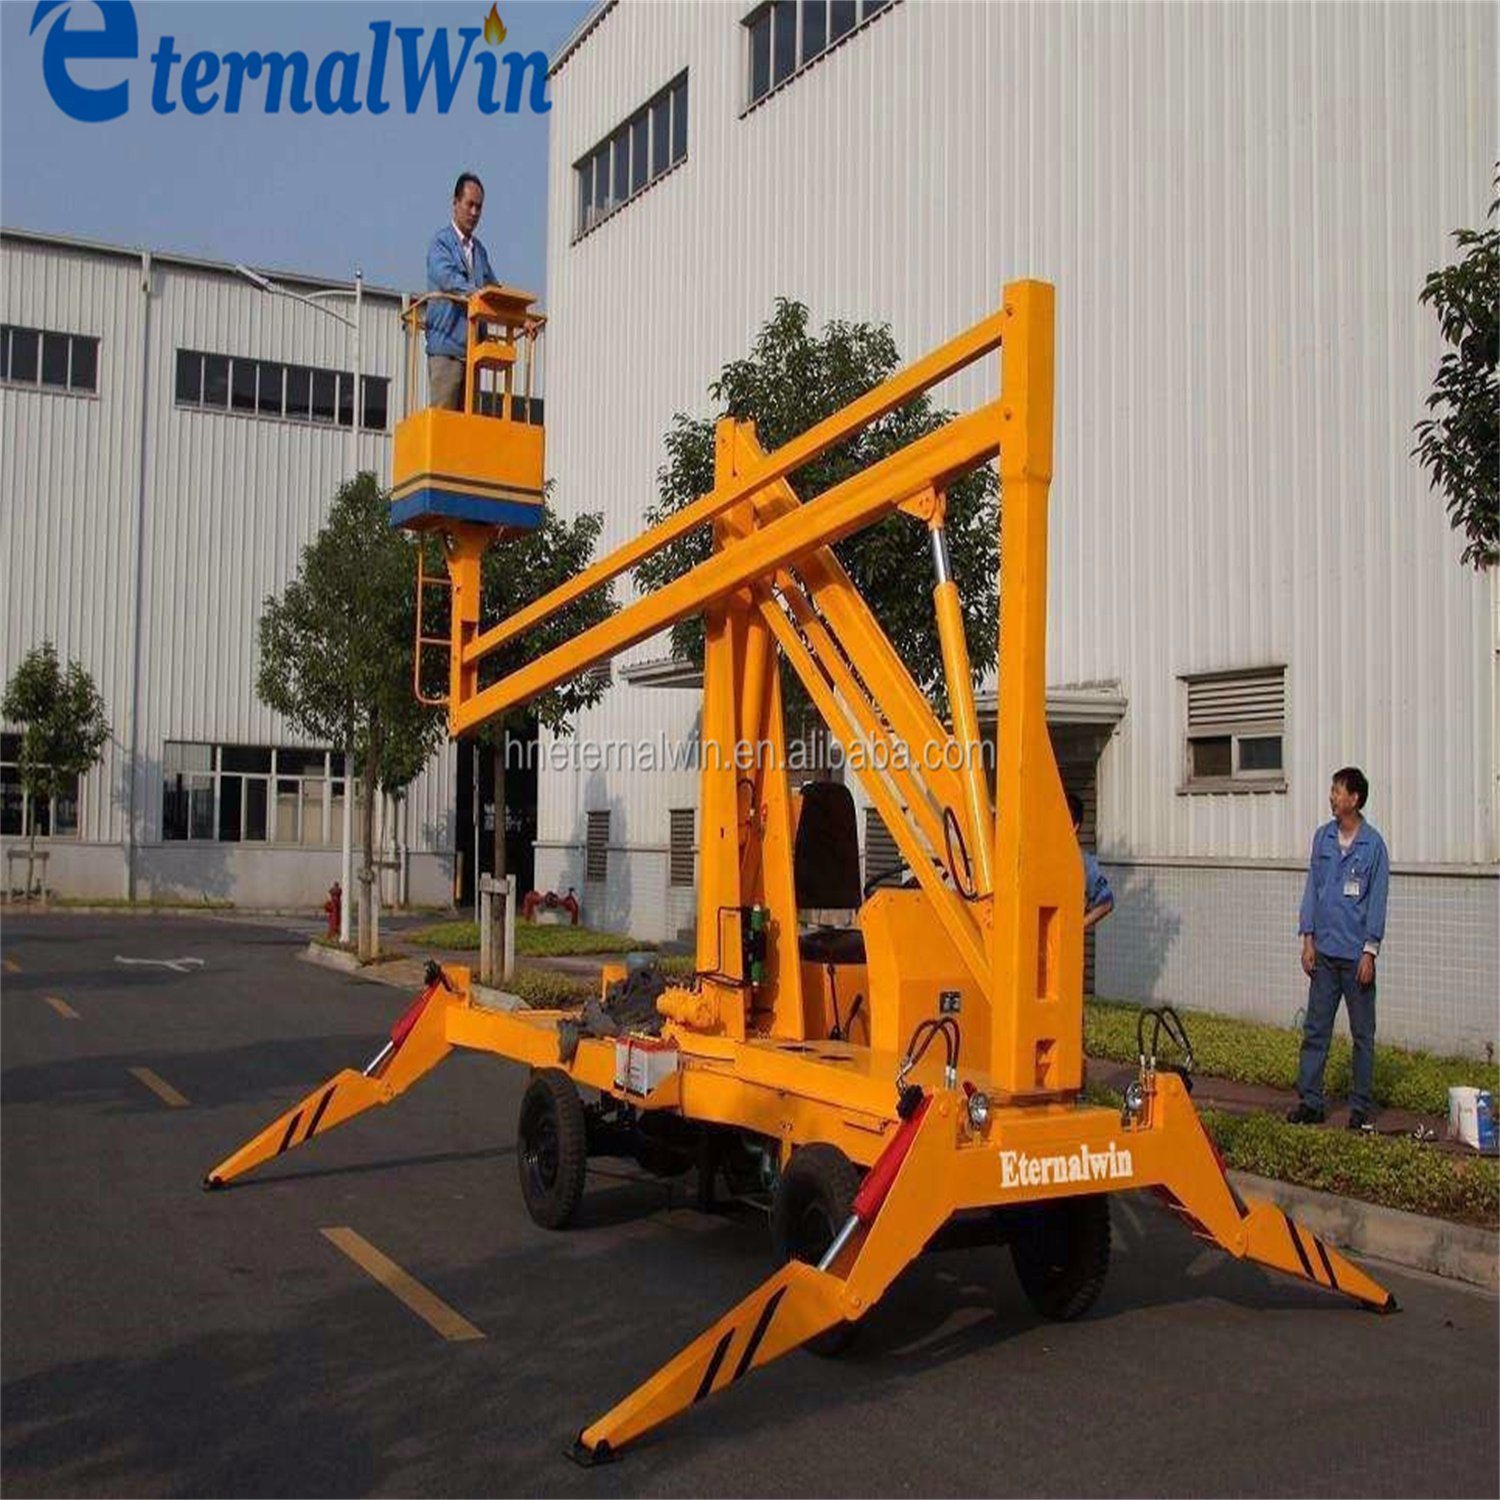 Hot Selling Articulated Towable Boom Lift Trailer Mounted Cherry Picker Aerial Platform Lift